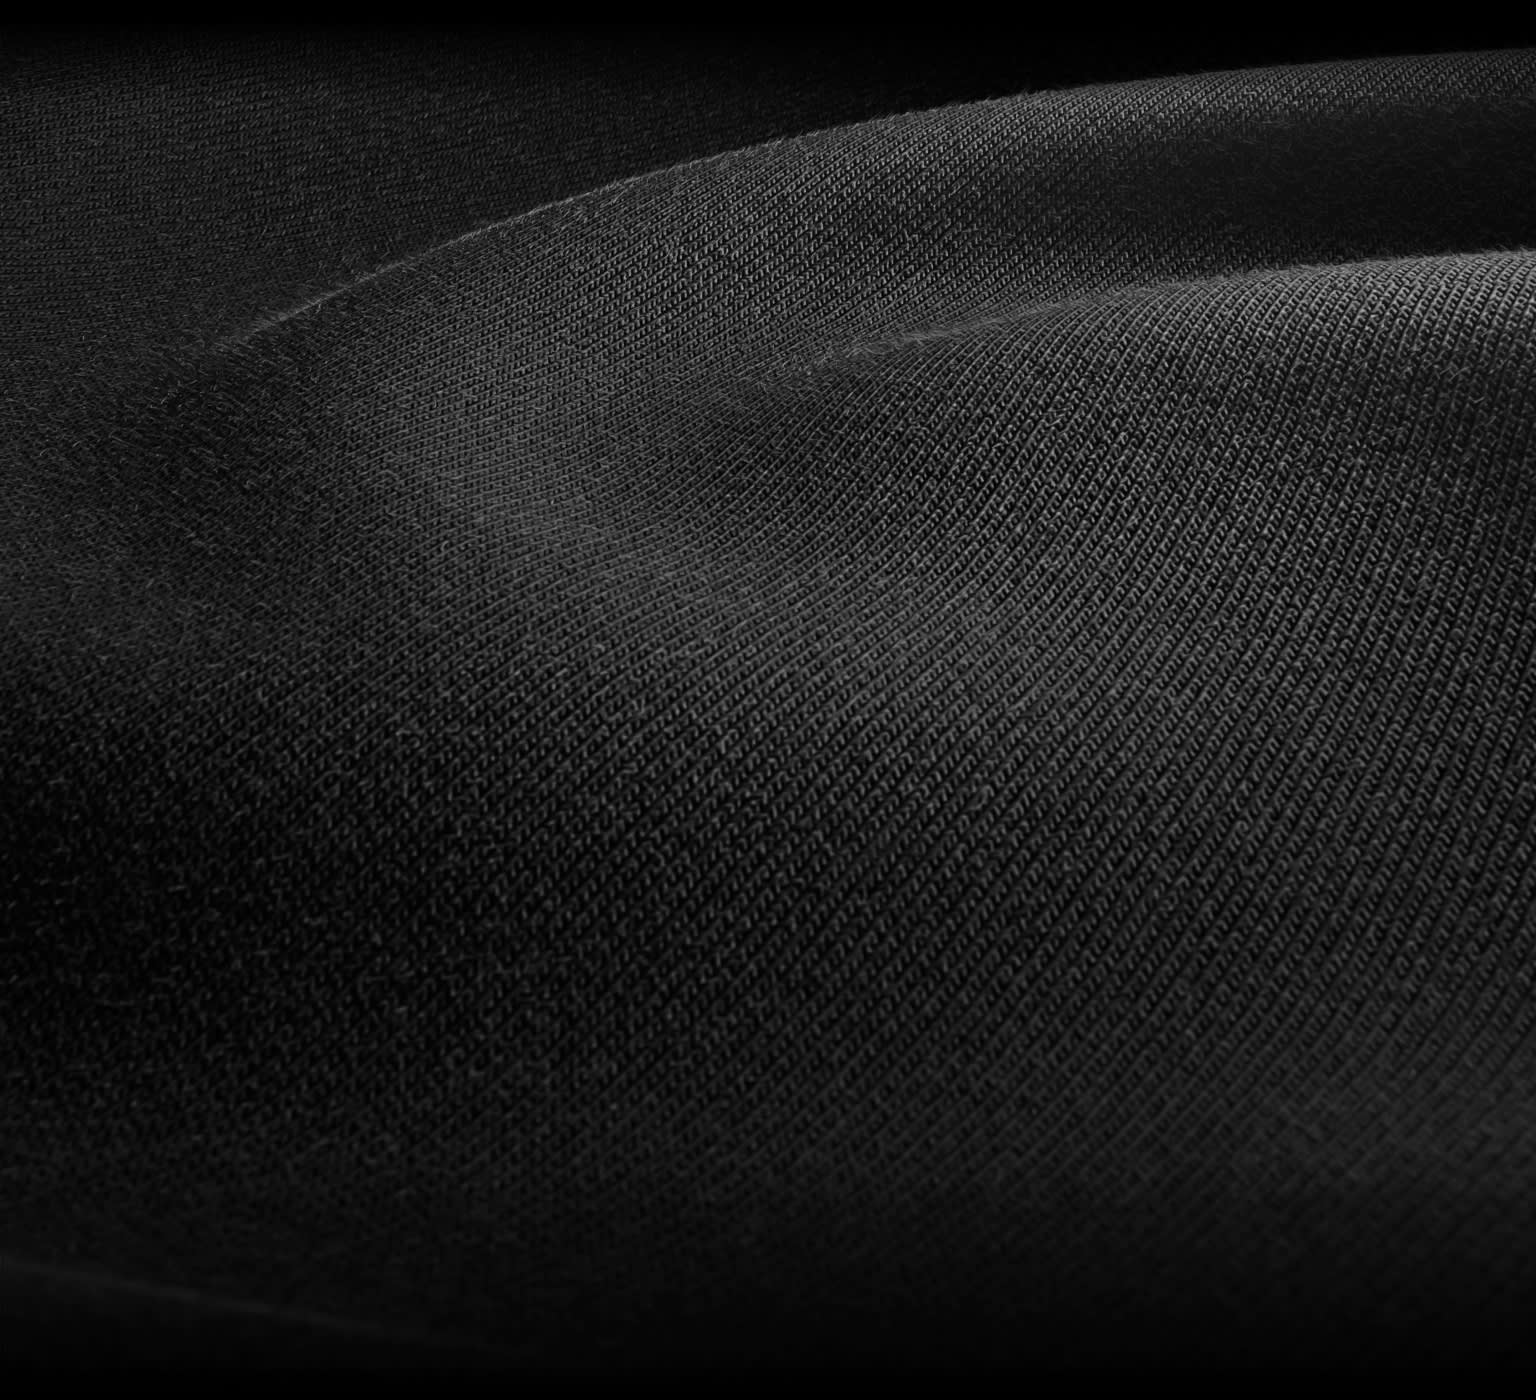 Closeup of the micro modal fabric used in the MANSCAPED® Boxers 2.0